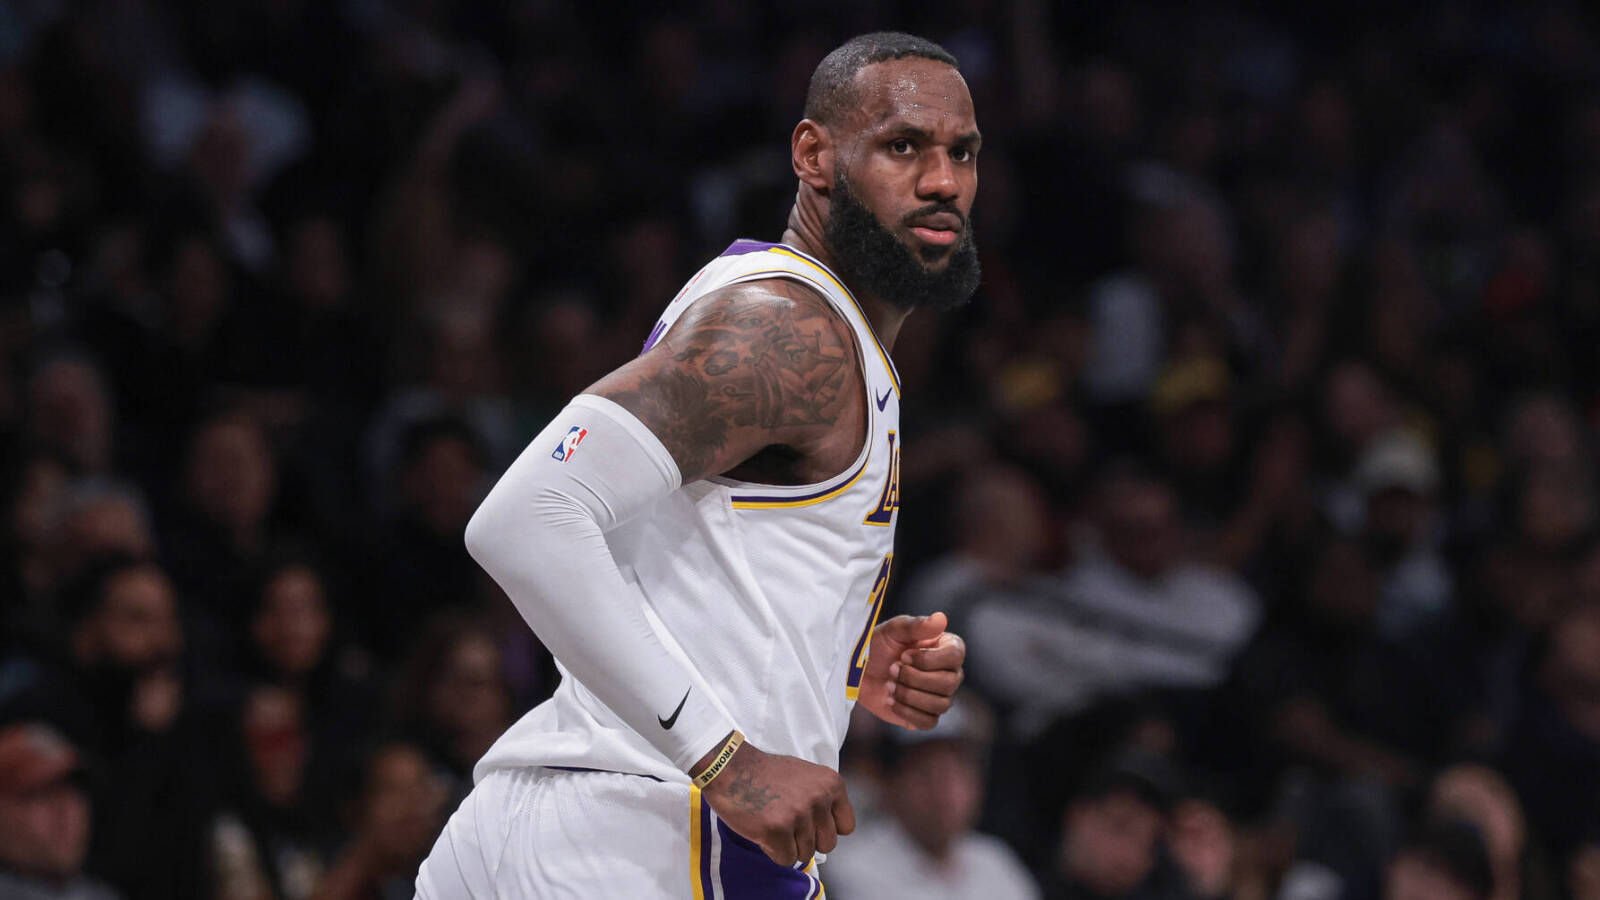 LeBron James on retirement: 'I don't have much time left'